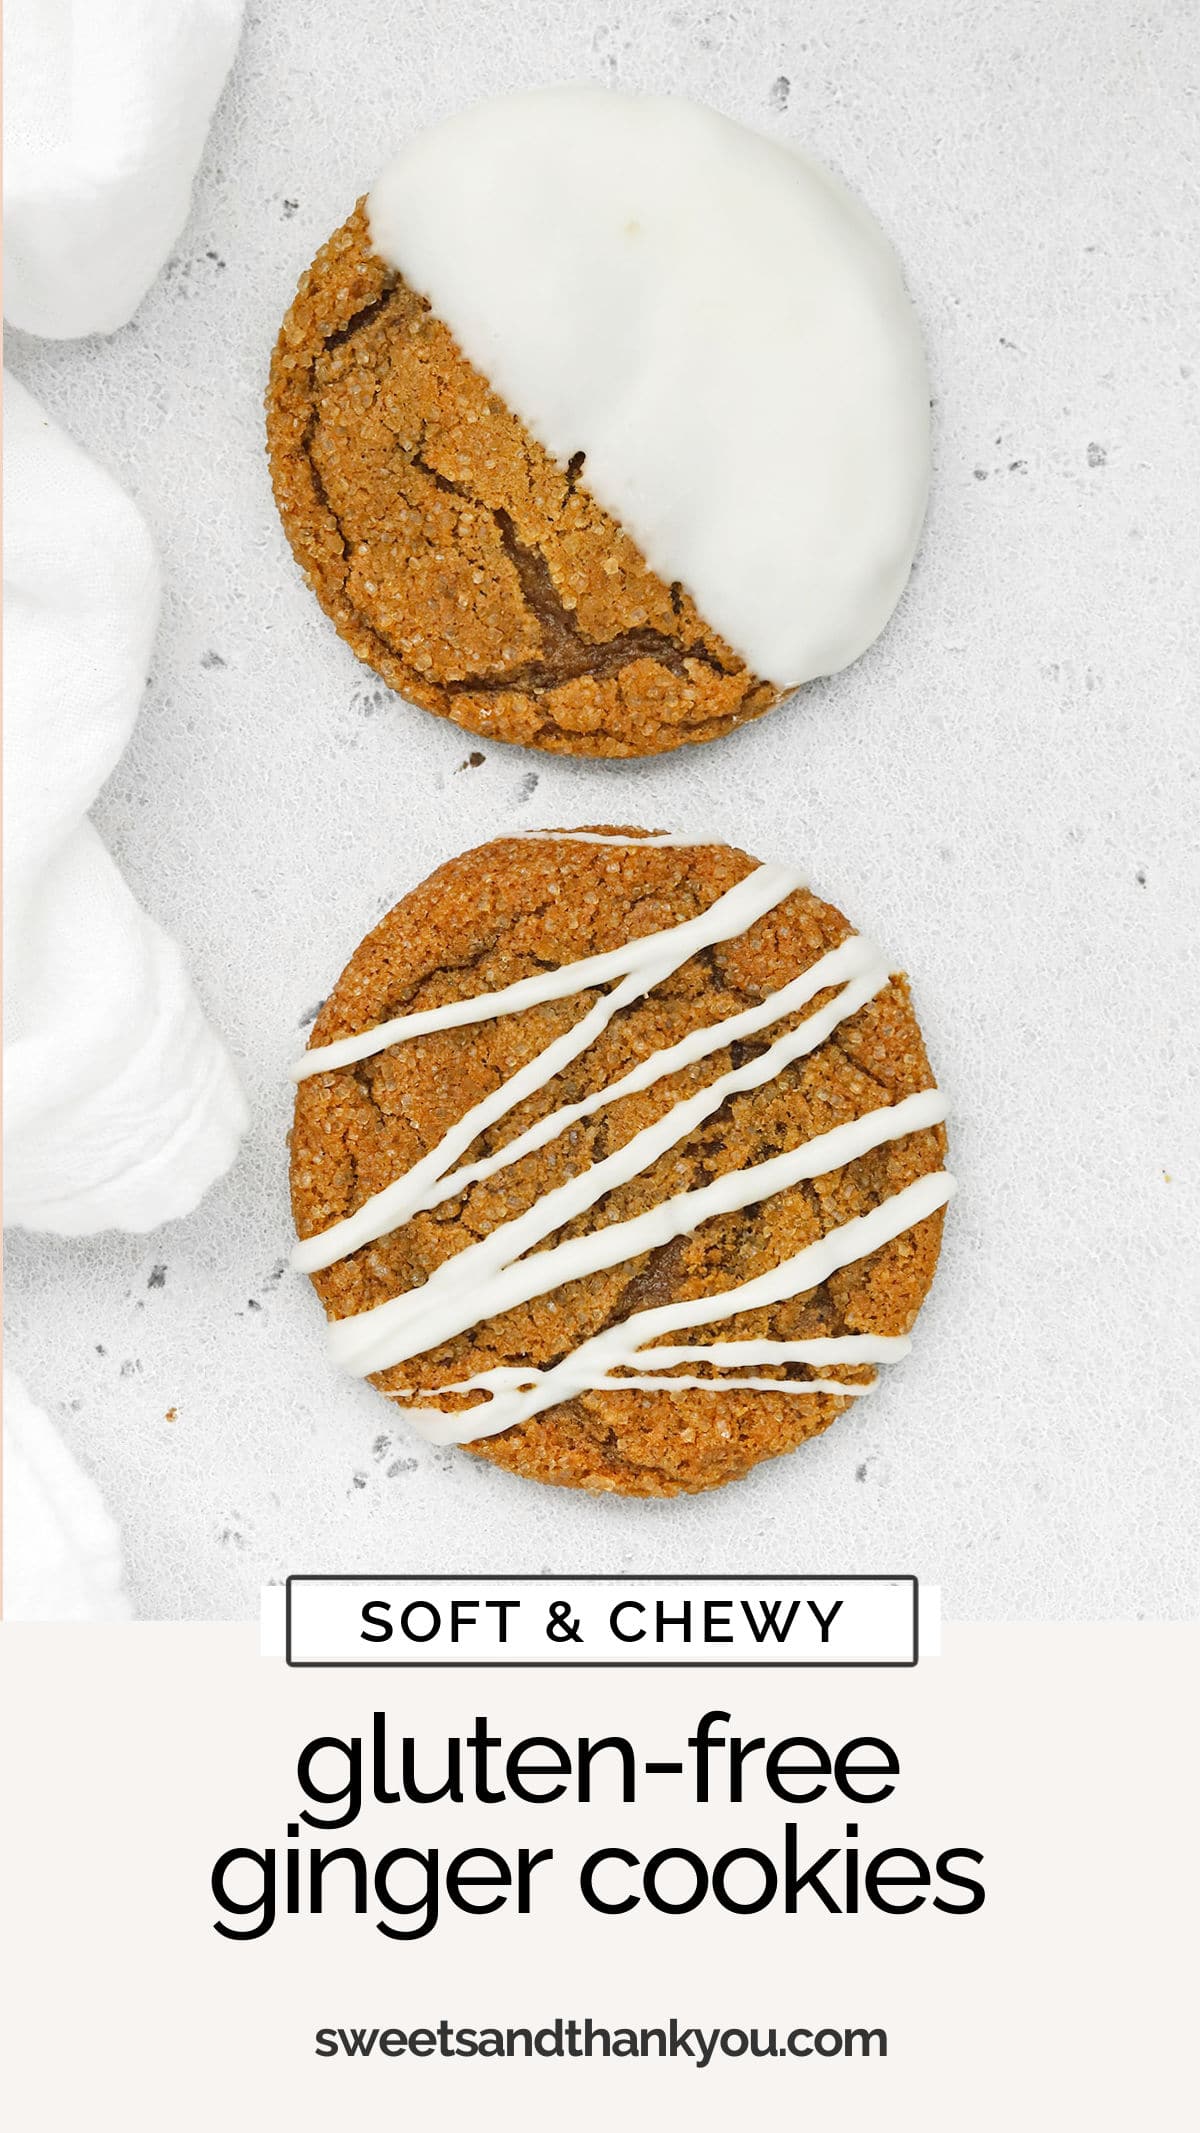 Soft & Chewy Gluten-Free Ginger Cookies - These gorgeous soft ginger cookies taste even better than they look. Try them drizzled or dipped in white chocolate for an extra pretty finish! // gluten free ginger cookies // chewy ginger cookies // soft ginger cookies // holiday ginger cookies // dipped ginger cookies // easy ginger cookies // gluten free holiday cookies // gluten-free holiday cookie plate / gluten-free christmas cookies / gluten-free cookie exchange recipe